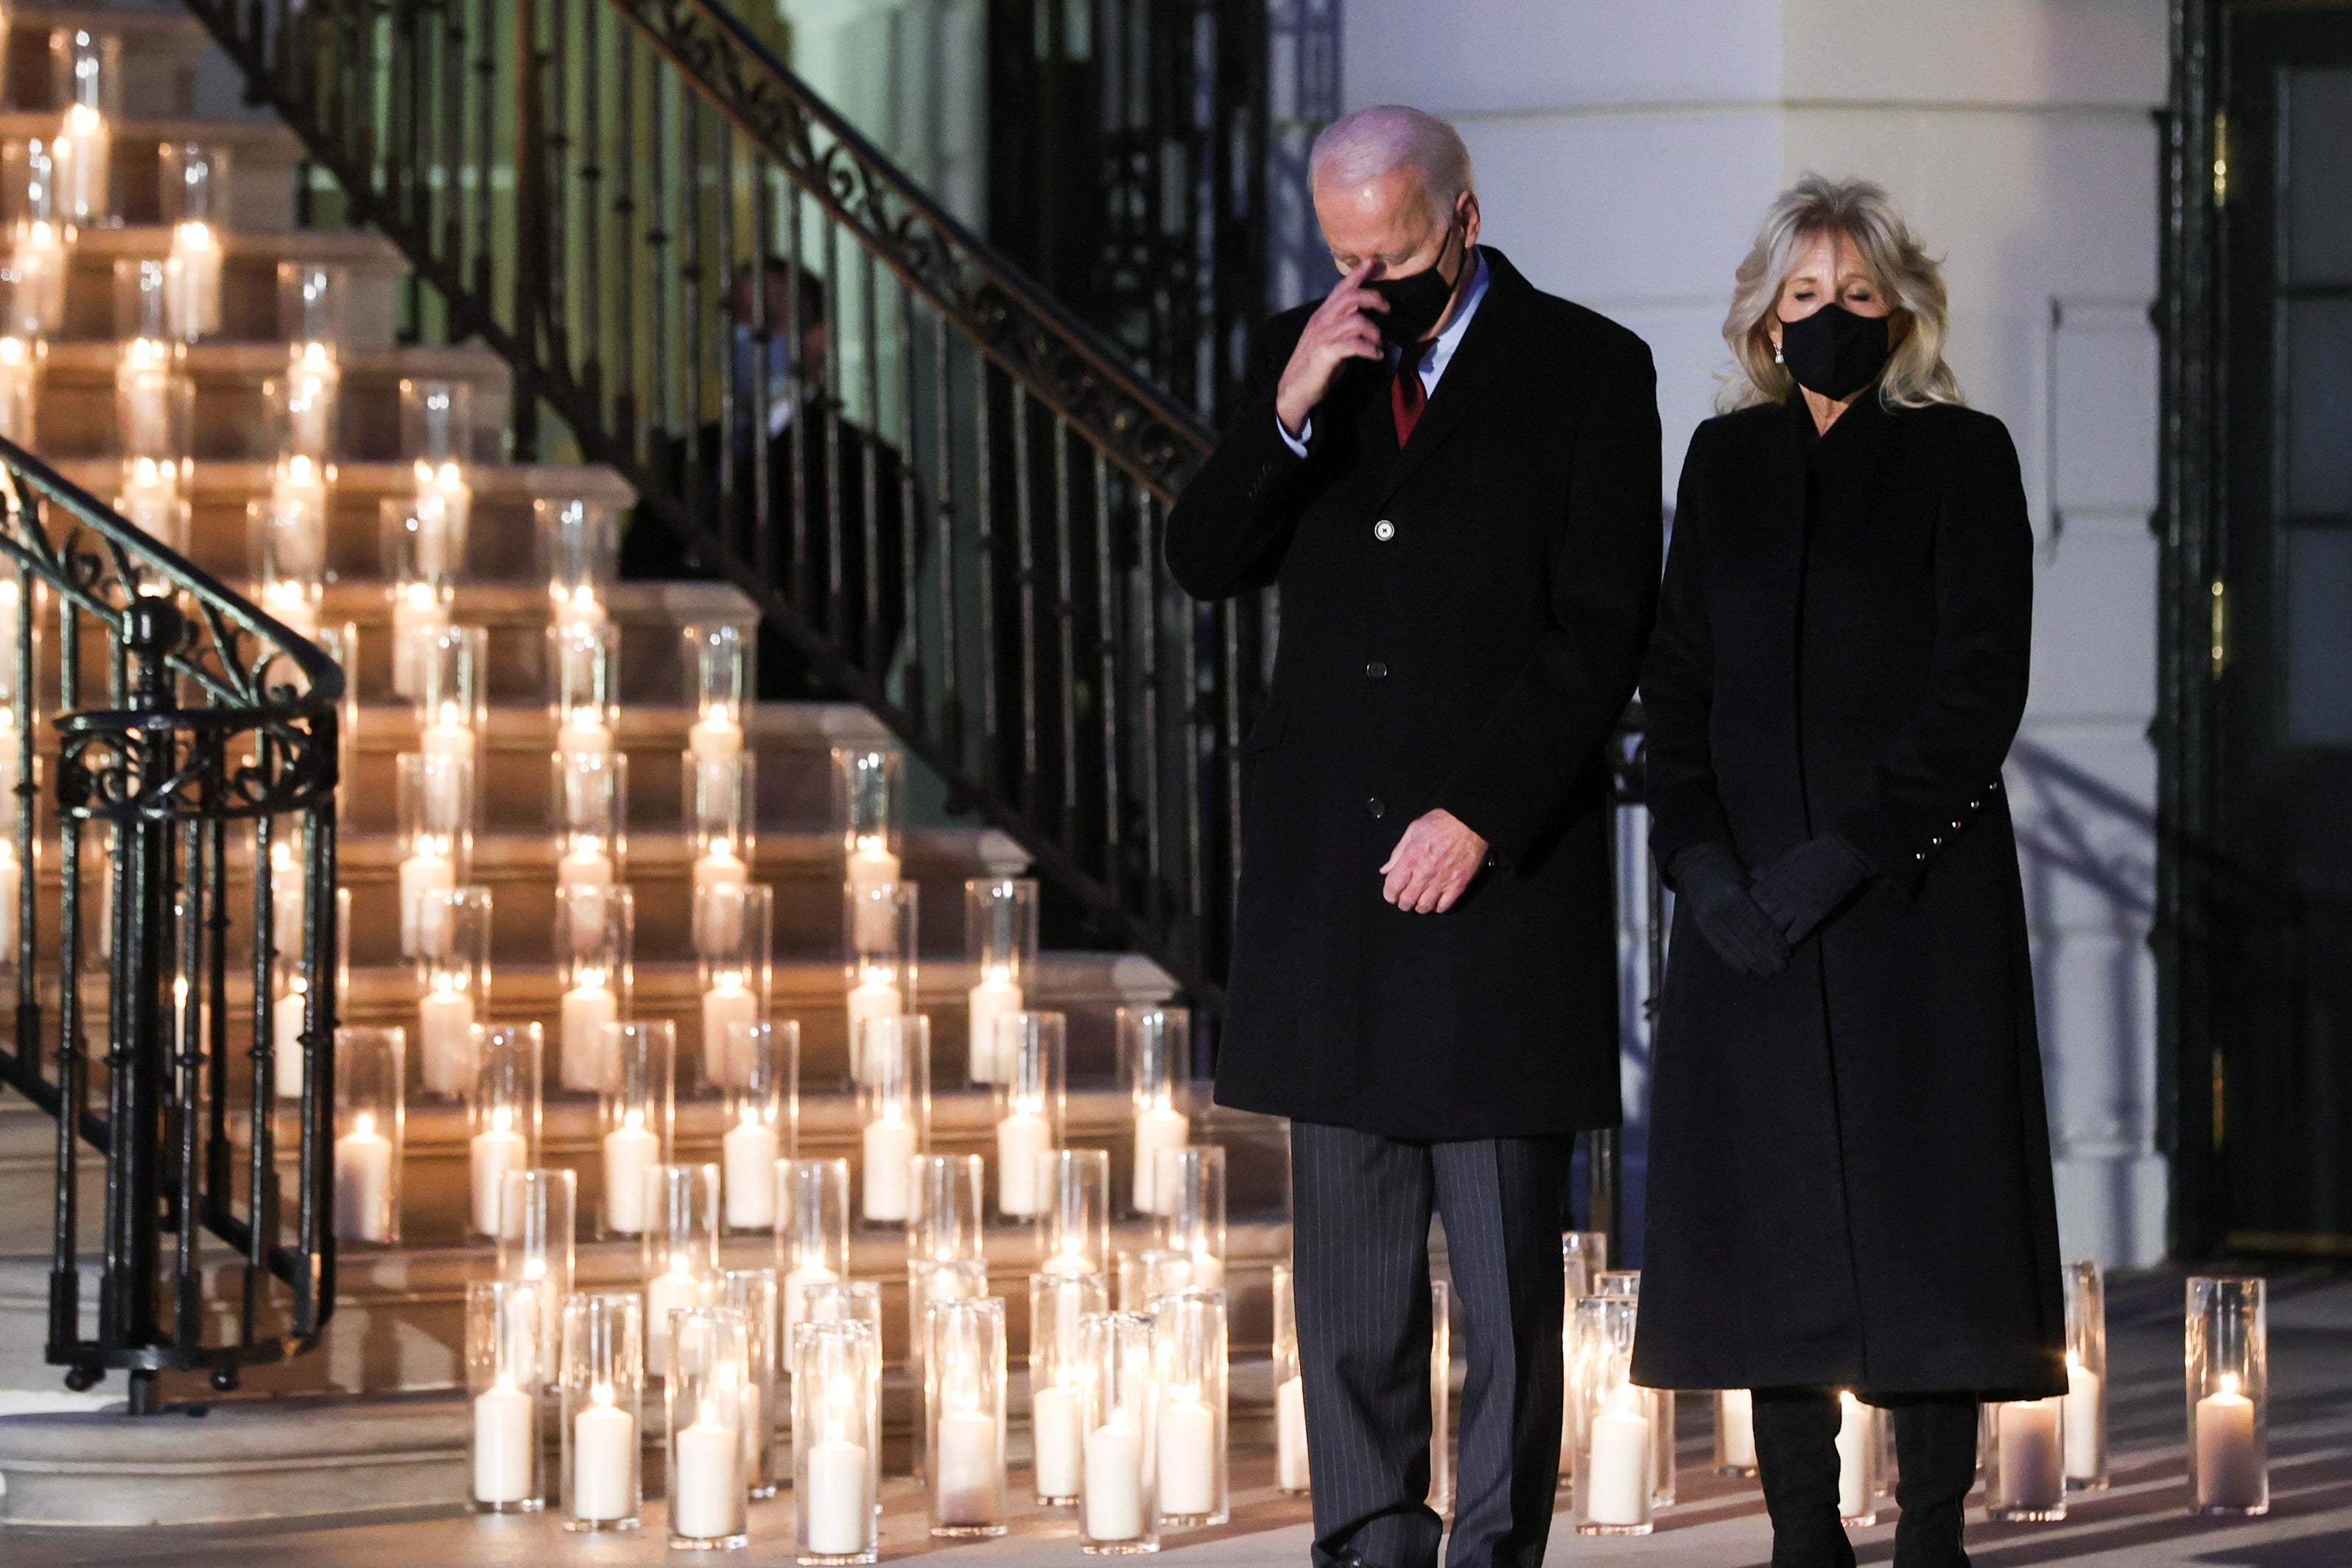 President Joe Biden commemorates the grim milestone of 500,000 U.S. deaths from the coronavirus disease (COVID-19) during a moment of silence and candle lighting ceremony at the White House in Washington